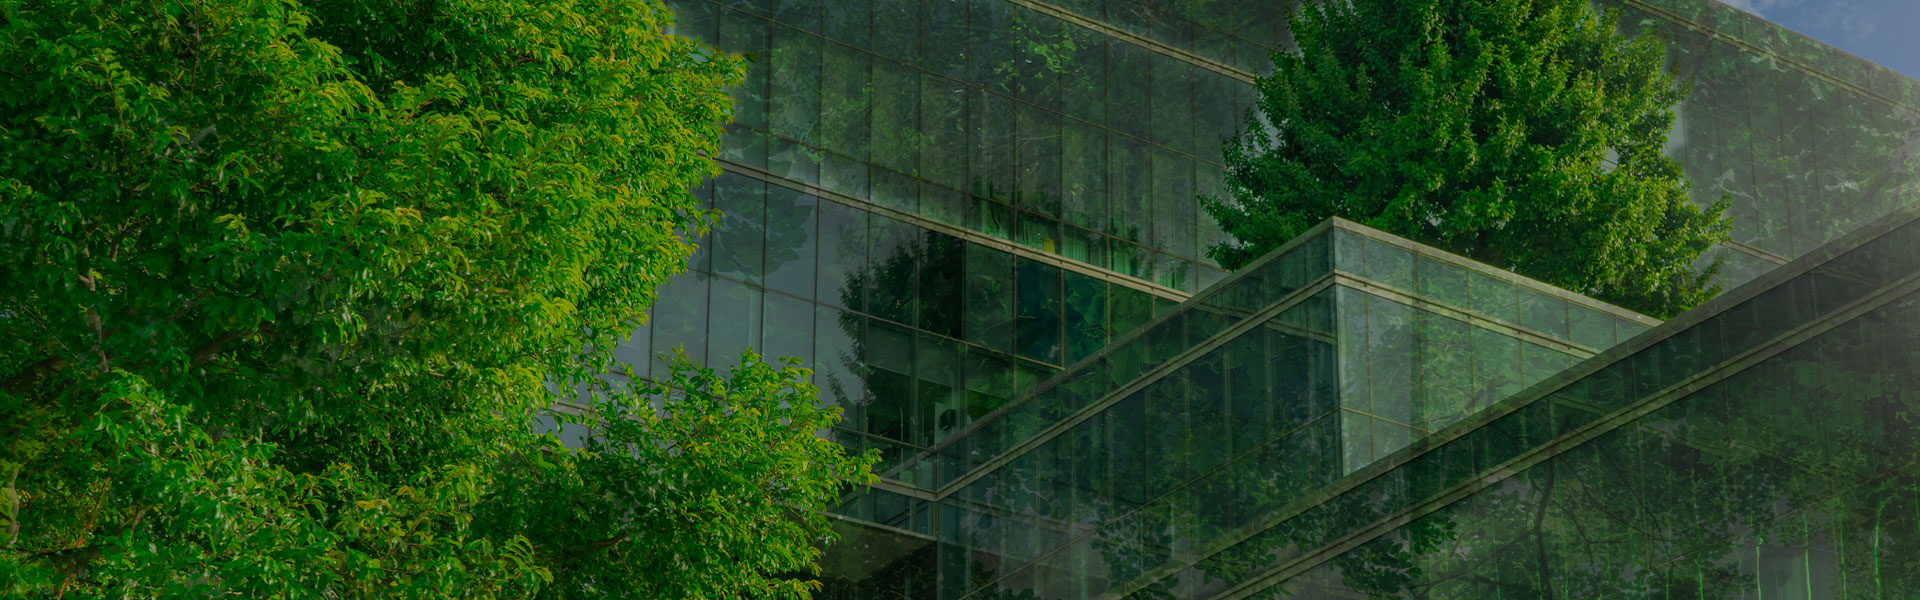 Glass building with planting